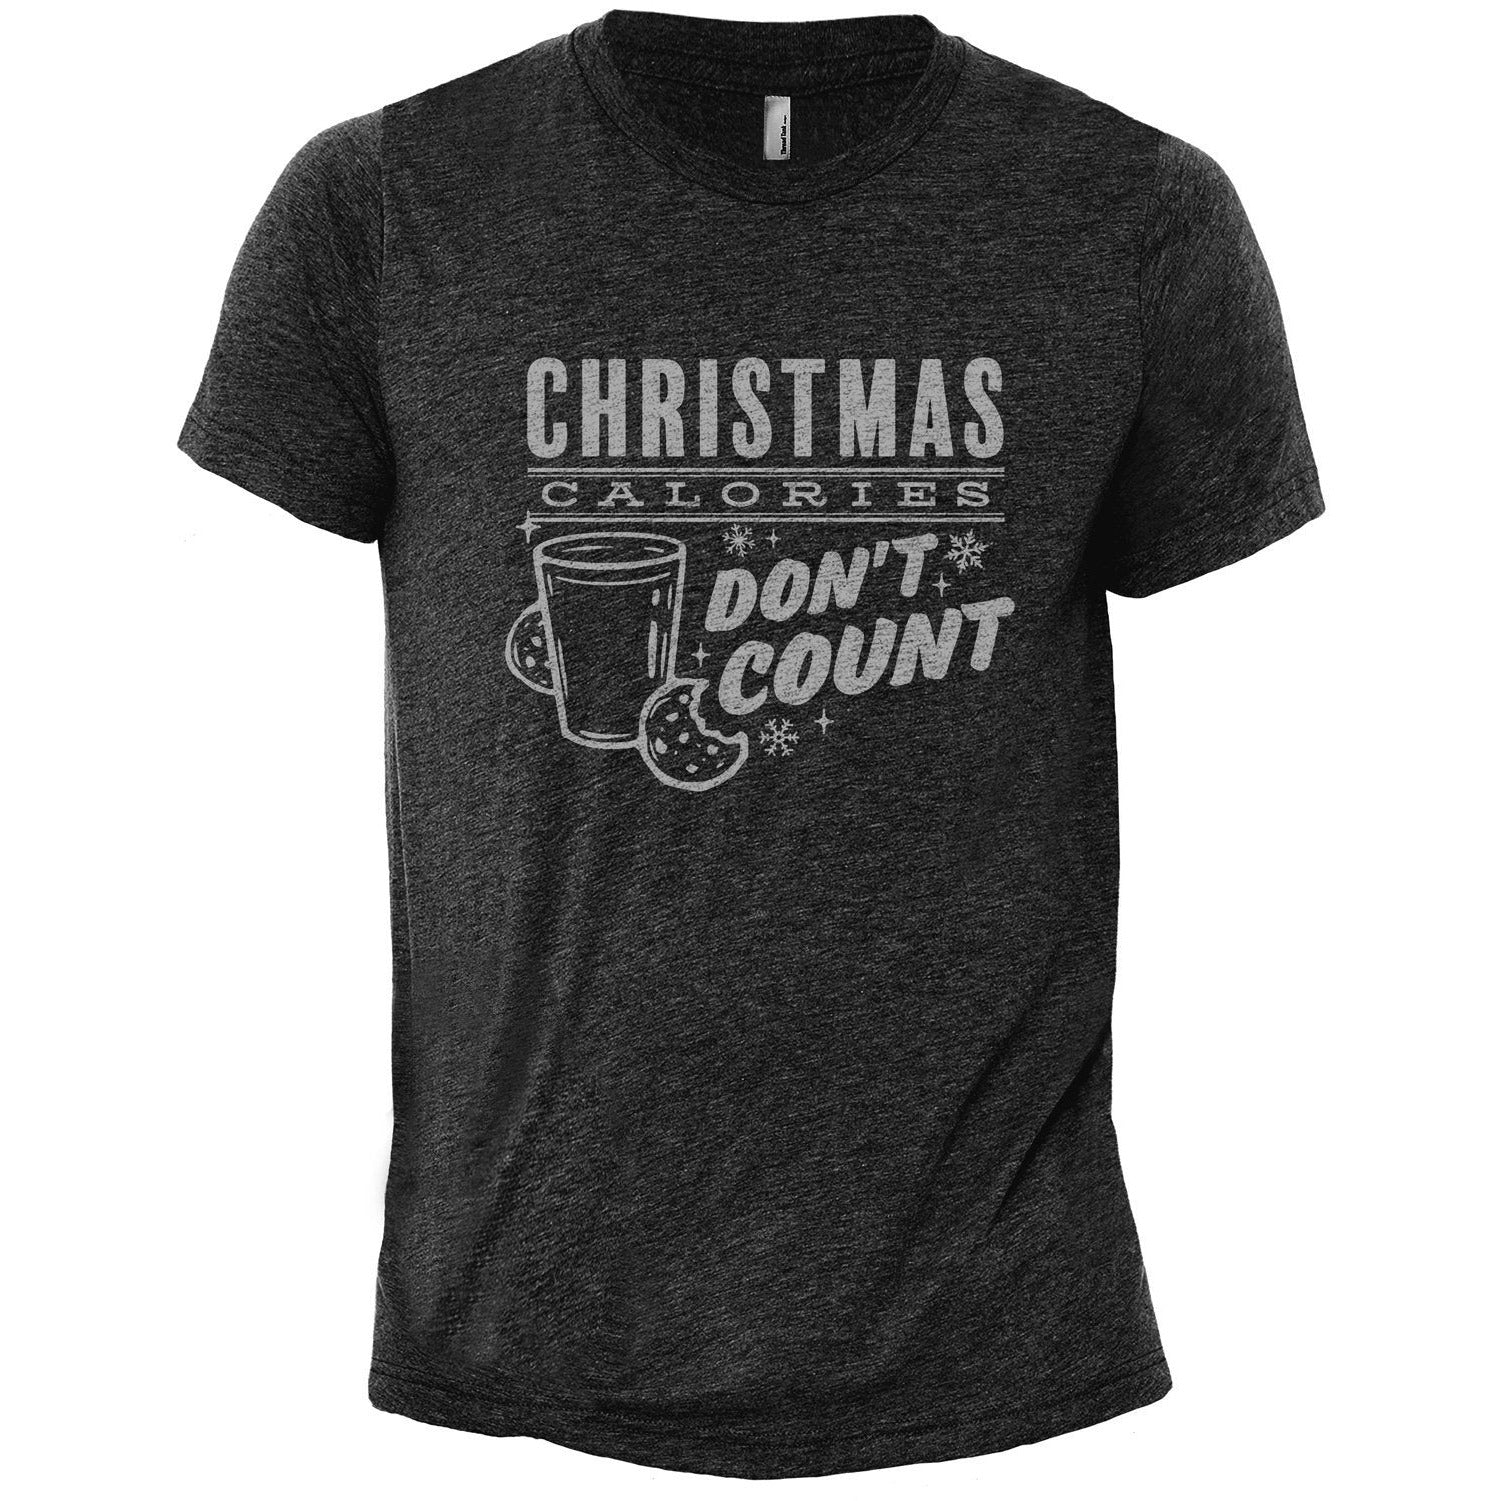 Christmas Calories Don't Count Charcoal Printed Graphic Men's Crew T-Shirt Tee